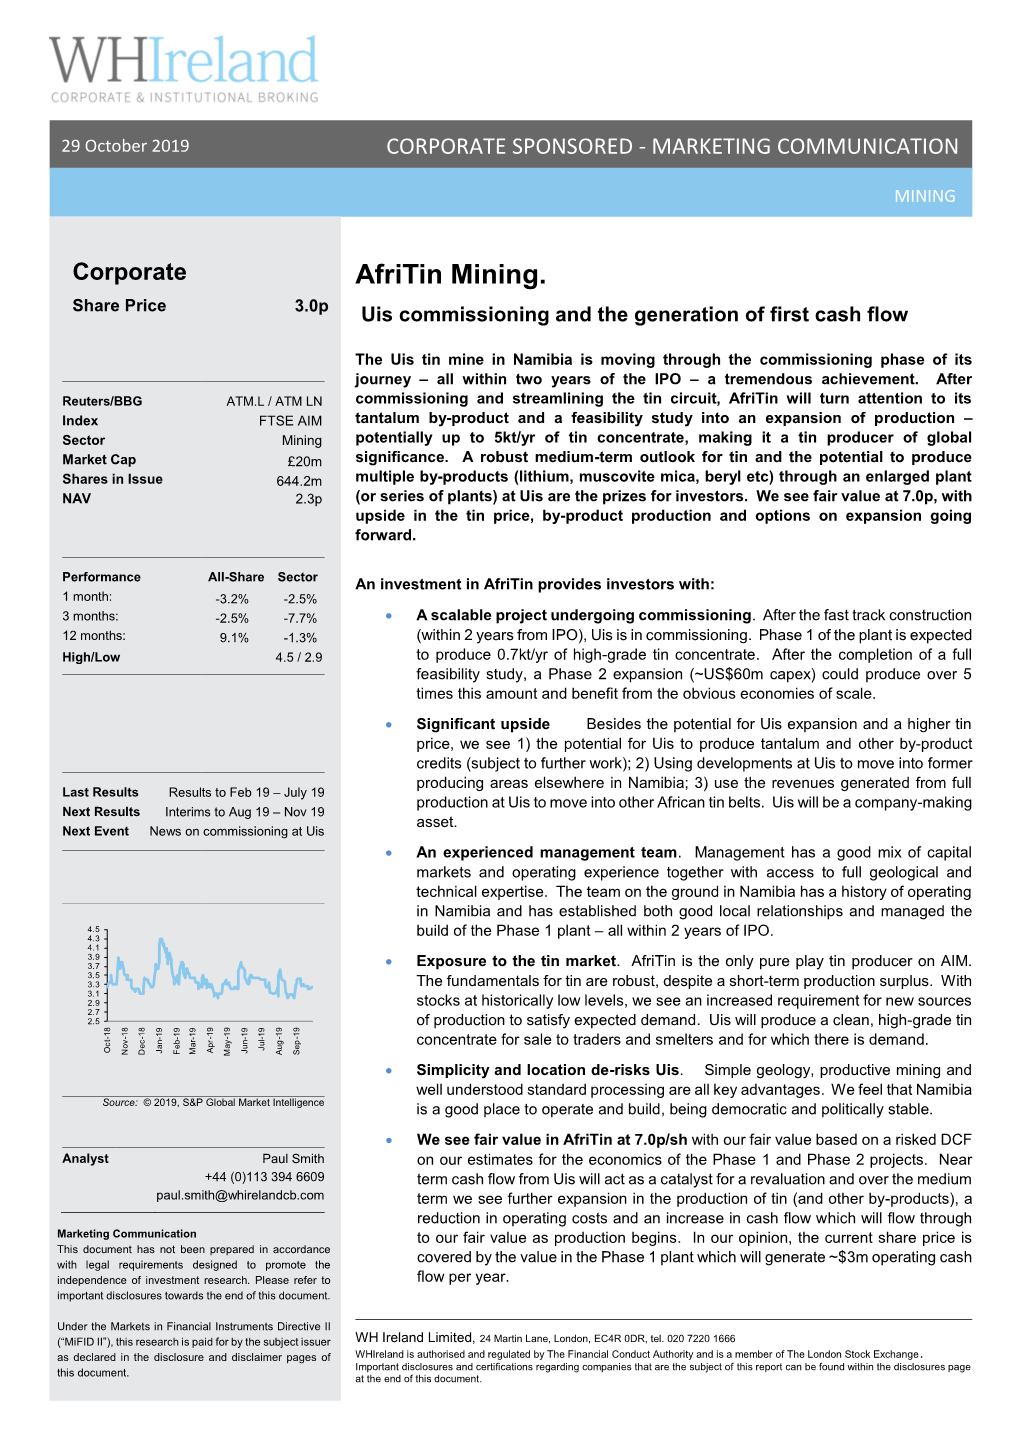 Afritin Mining. Share Price 3.0P Uis Commissioning and the Generation of First Cash Flow